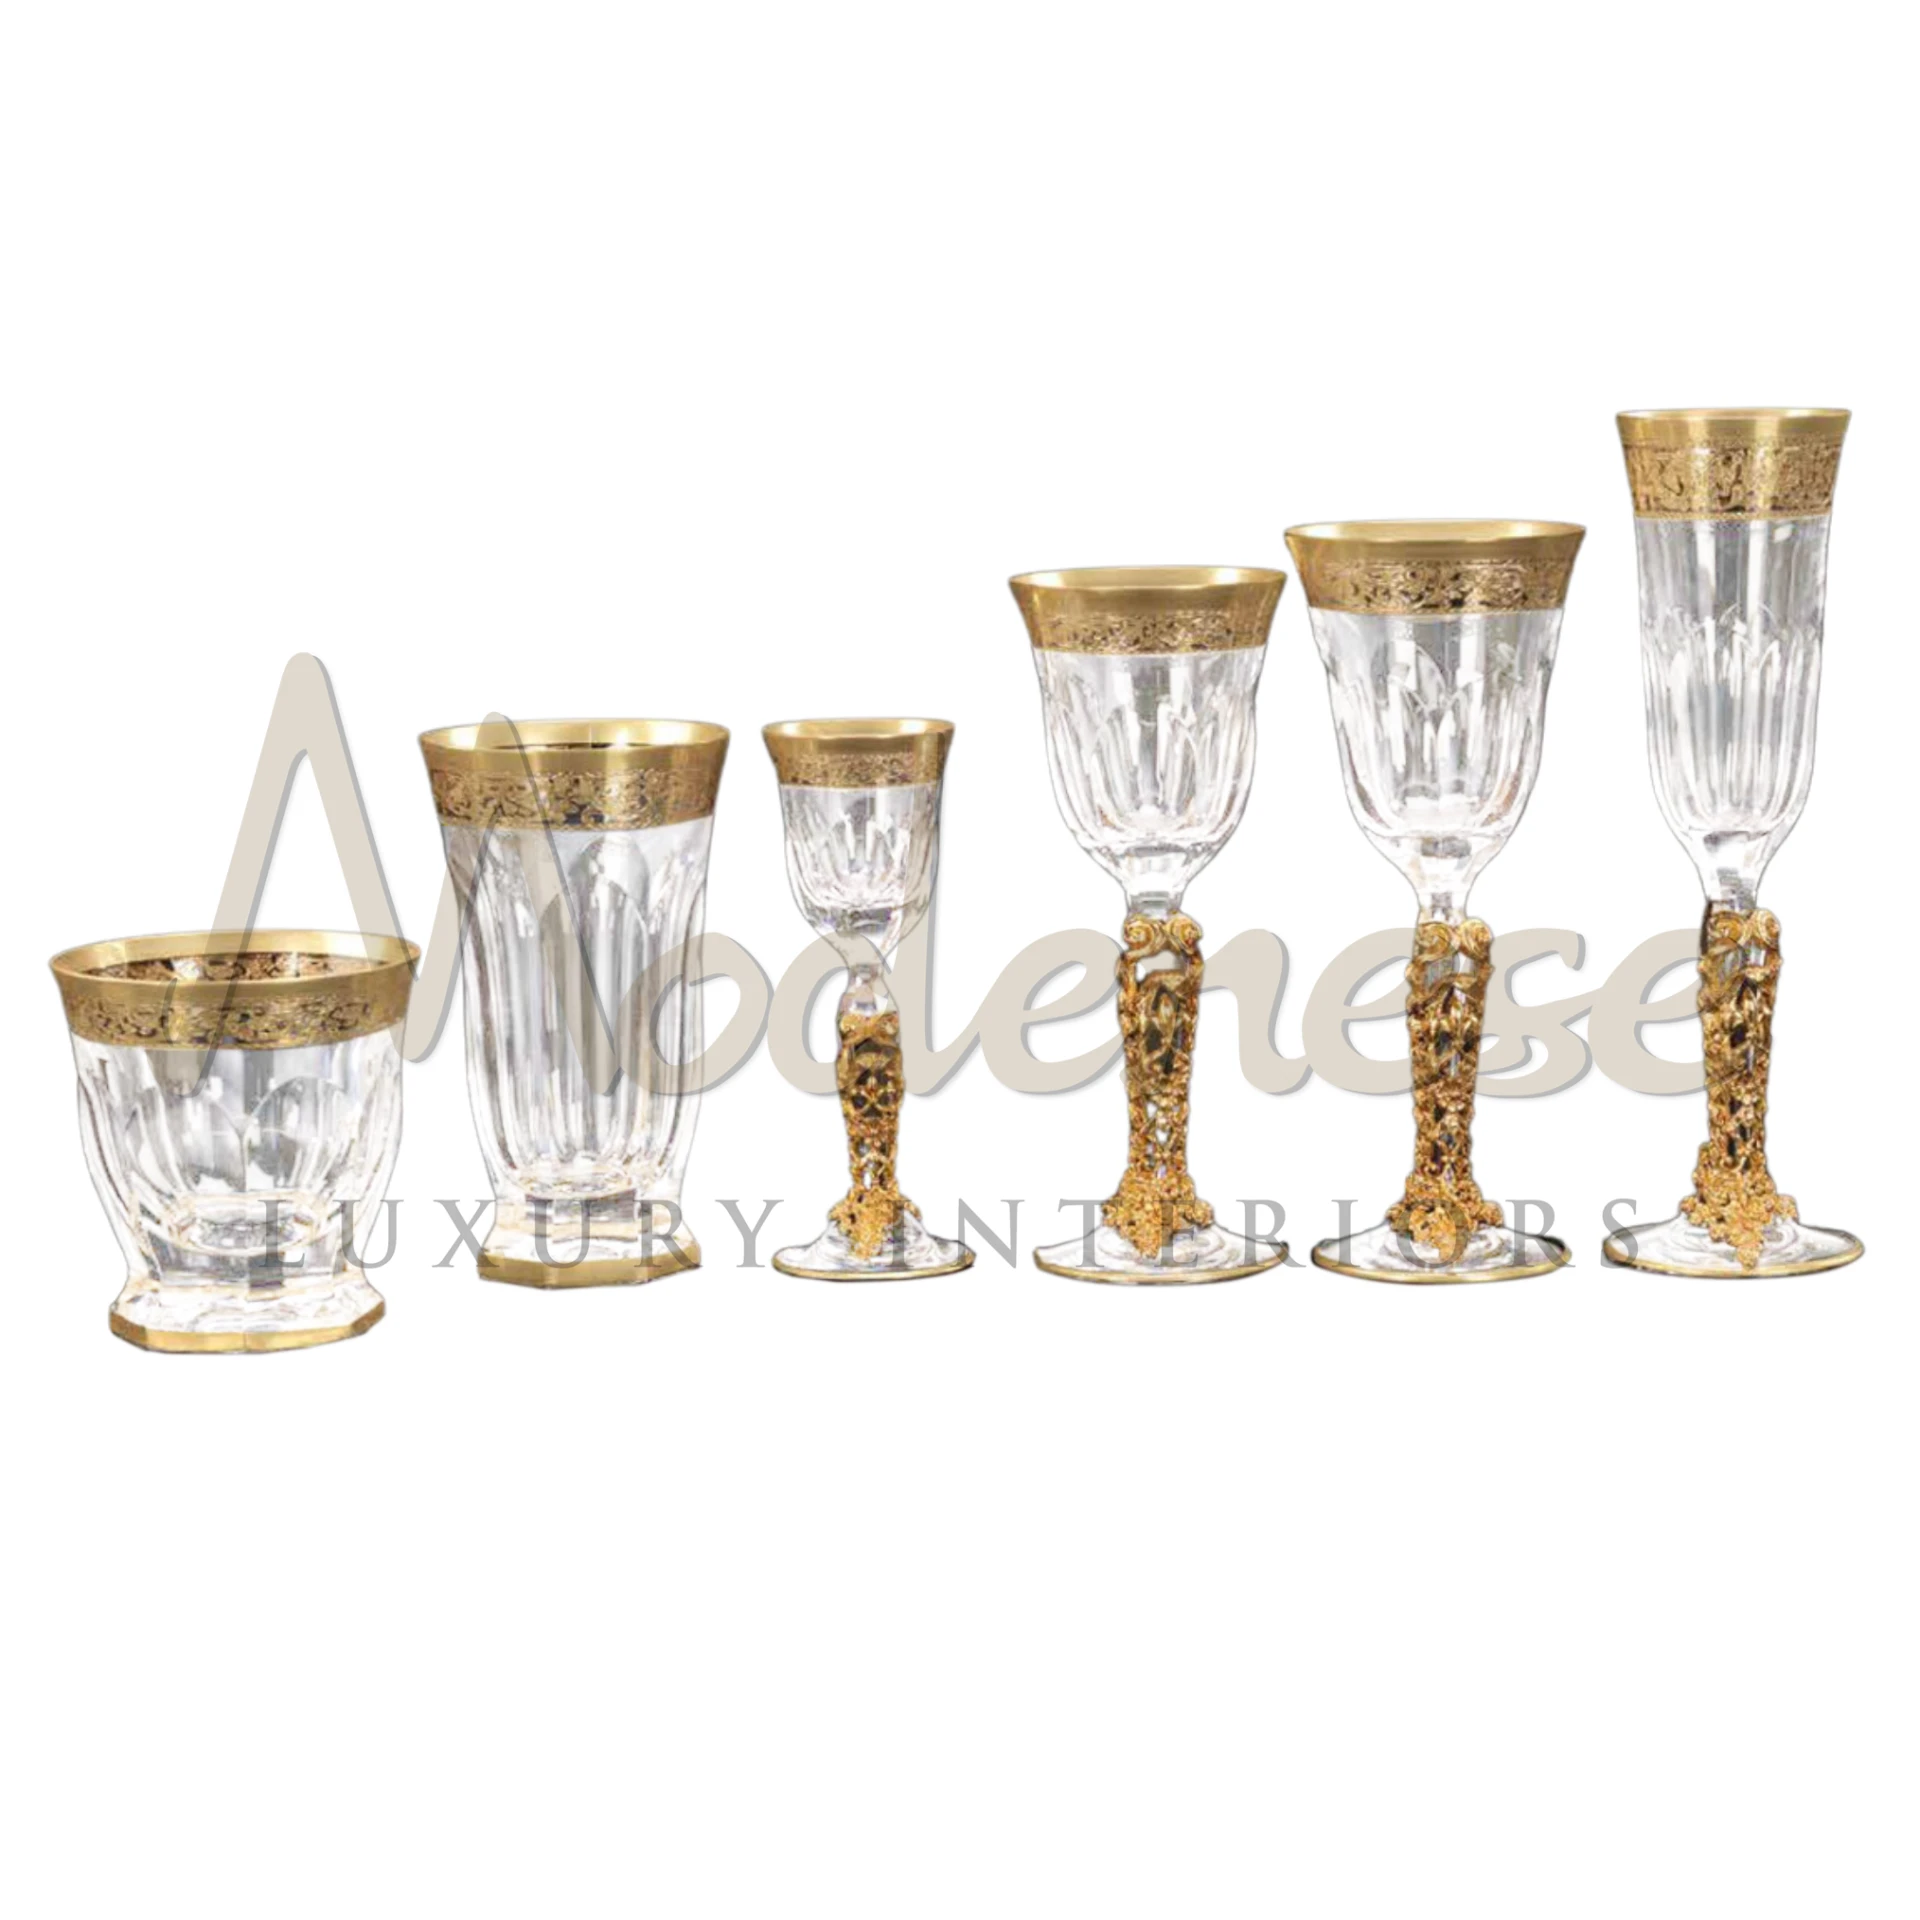 Elegant Luxury Crystal & Bronze Glassware collection for fine dining